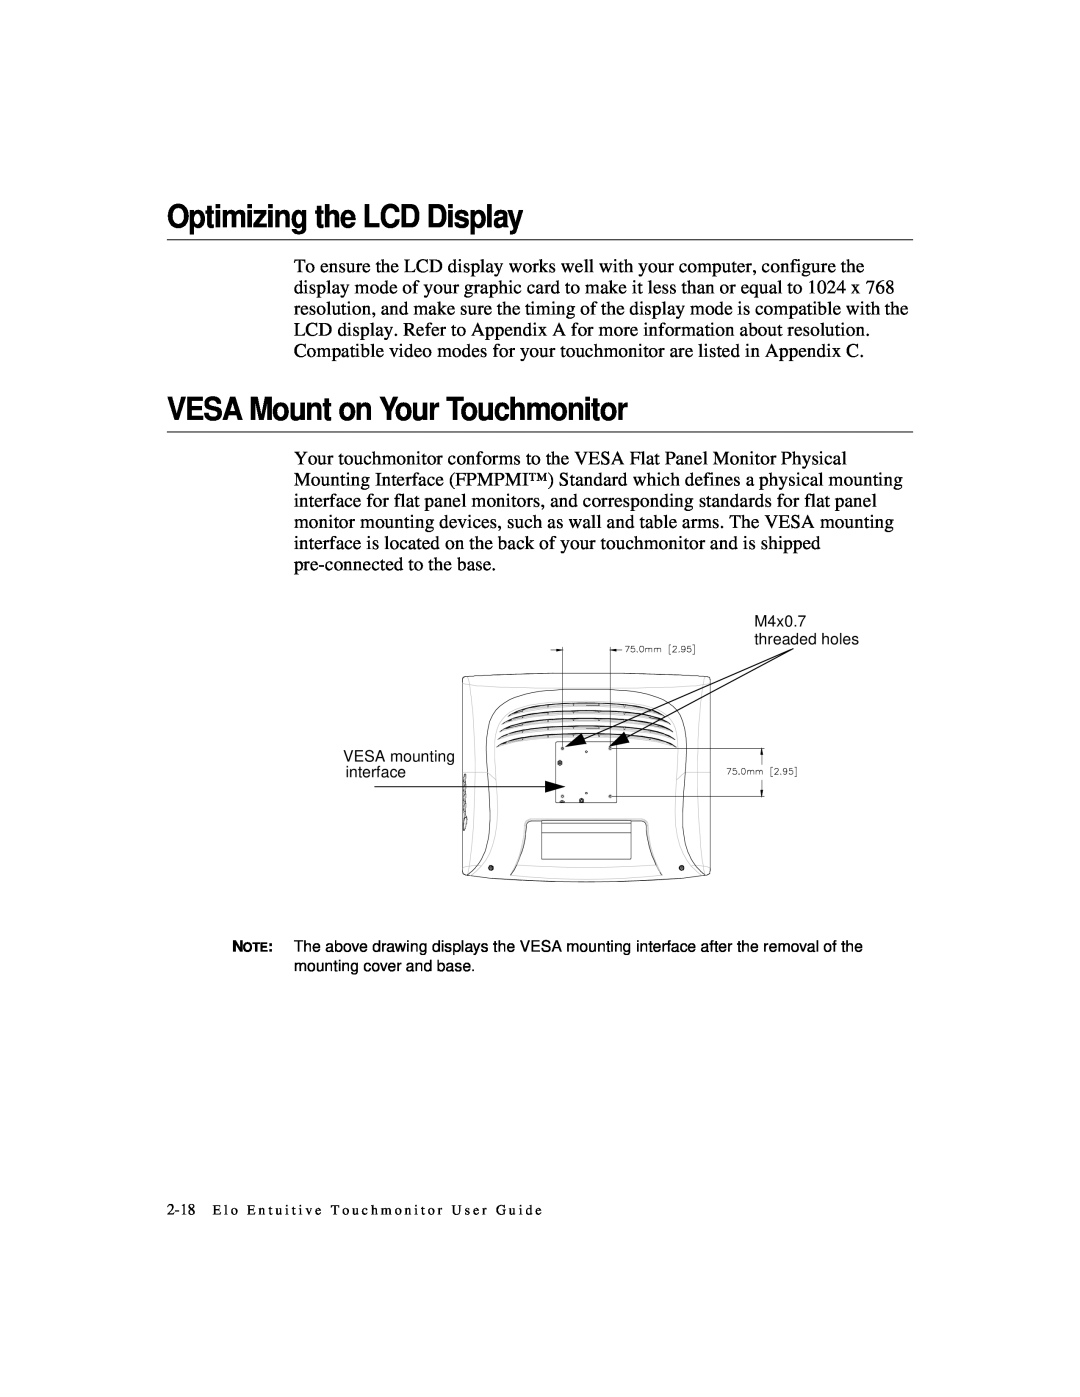 Elo TouchSystems 1525L manual Optimizing the LCD Display, VESA Mount on Your Touchmonitor 